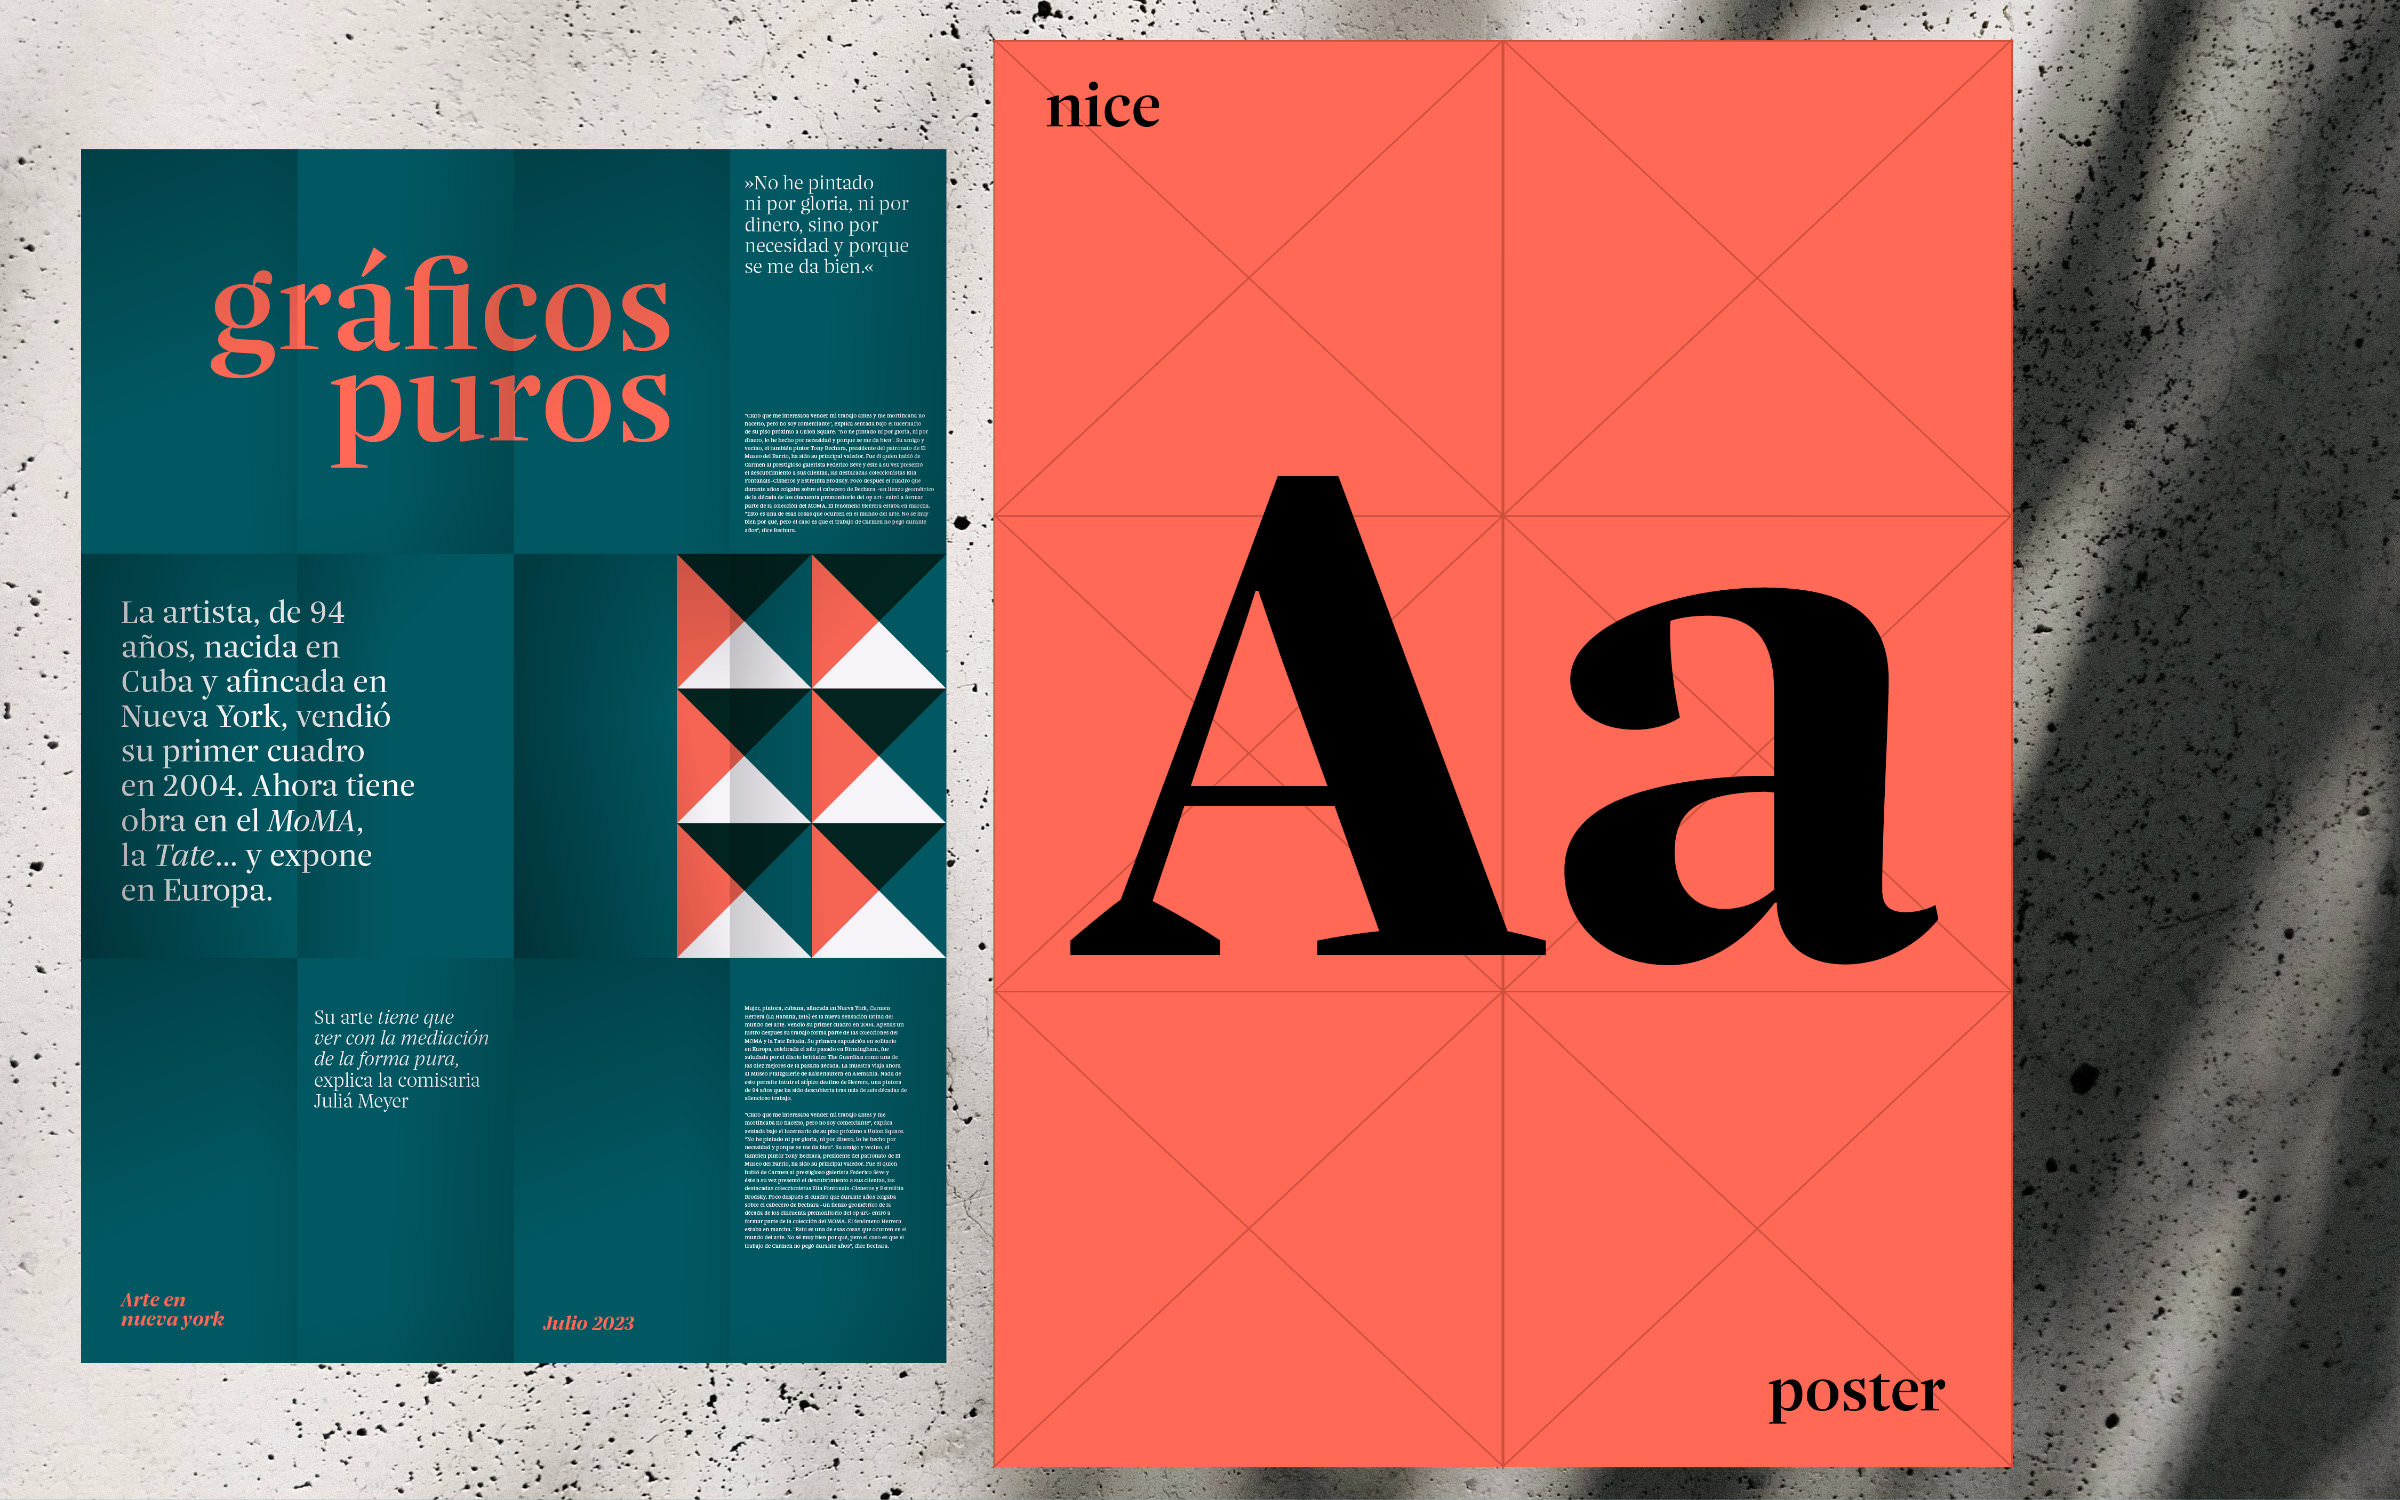 Nice – Fictitious poster design